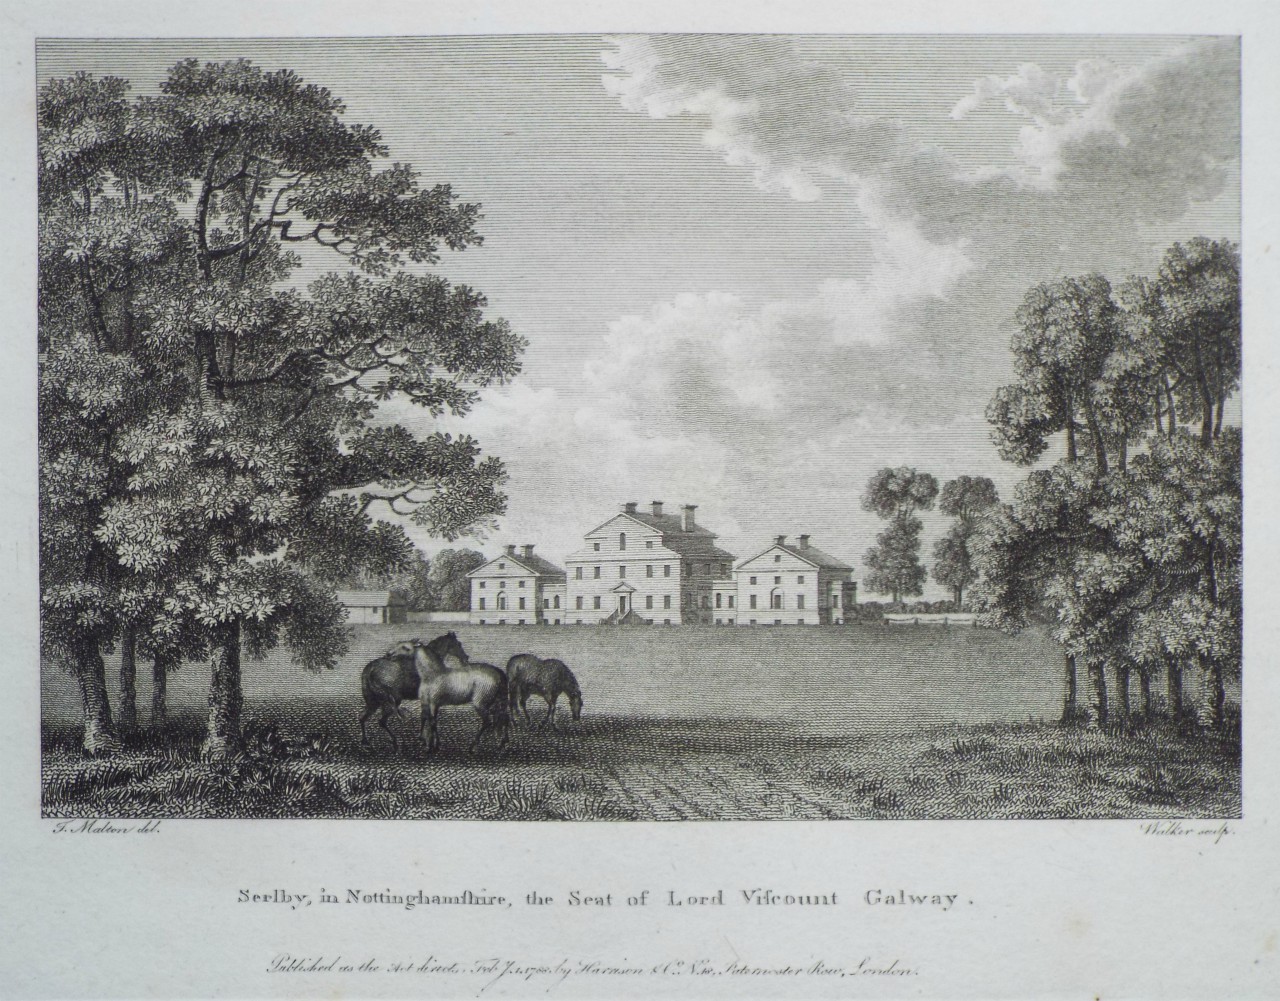 Print - Serlby, in Nottinghamshire, the Seat of Lord Viscount Galway. - 